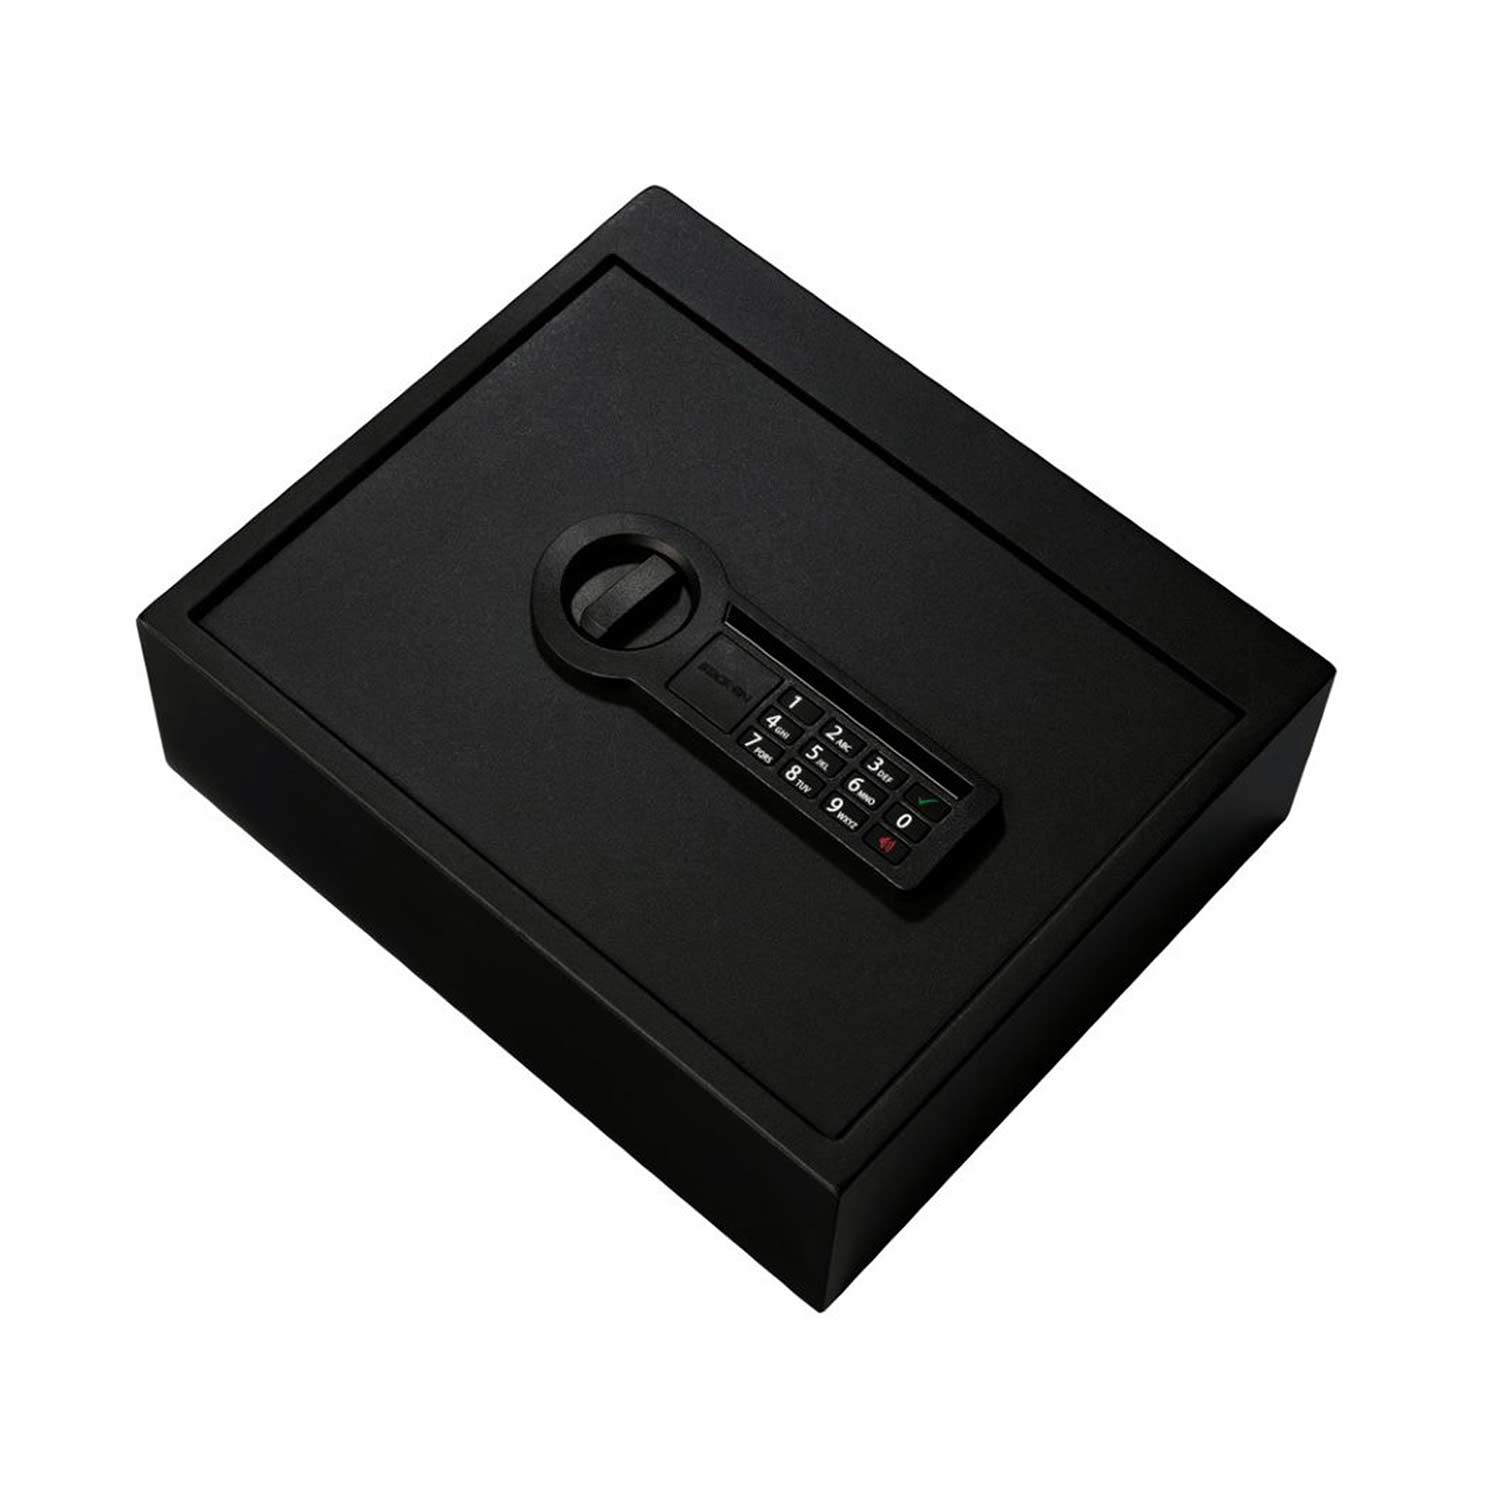 StackOn Products Personal Drawer Safe with Biometric Finger